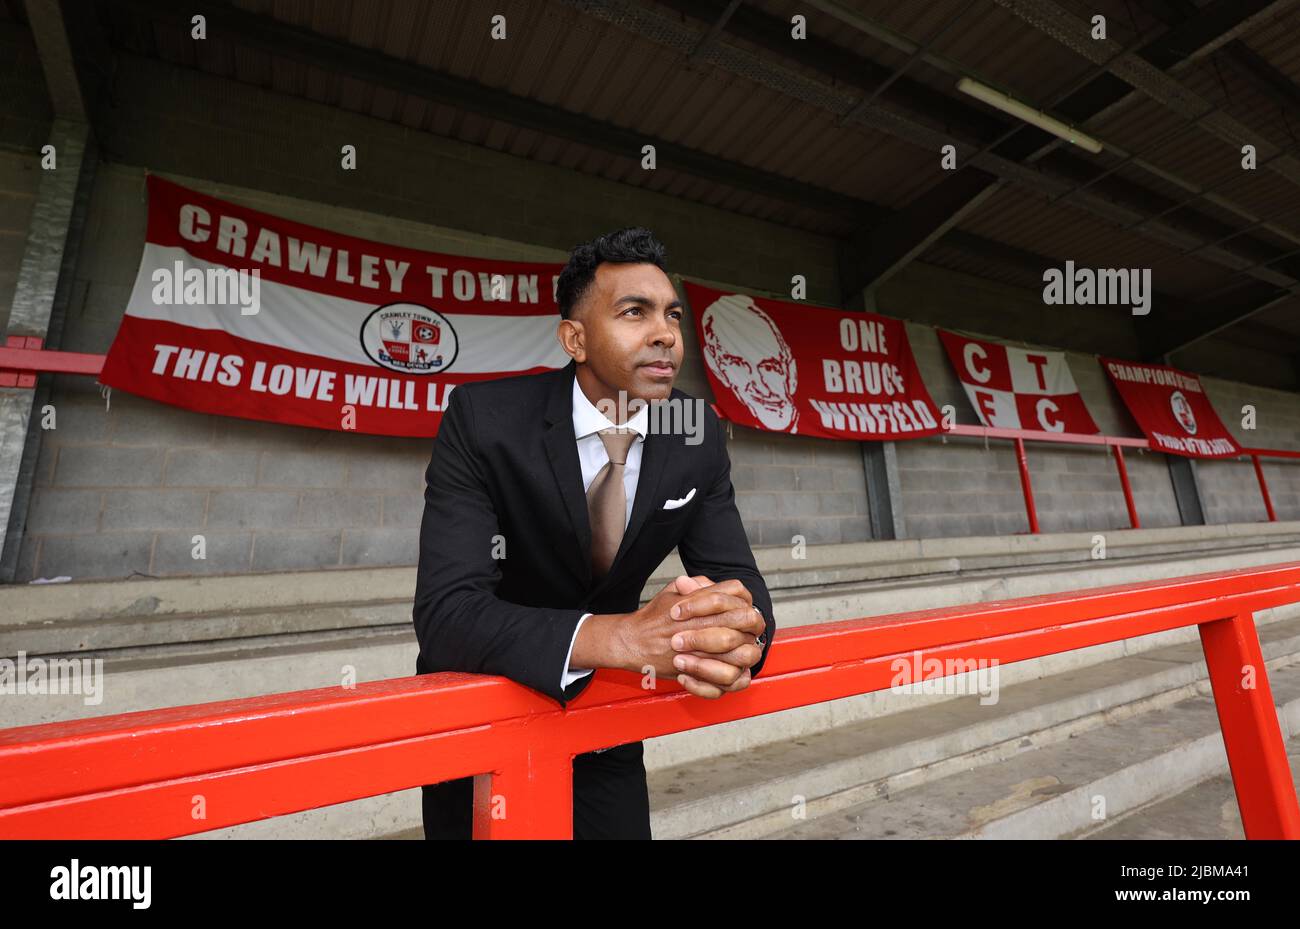 Crawley, UK. 7th June, 2022. Crawley Town Football Club's new manager Kevin Betsy and his assistant Dan Micciche at the Broadfield Stadium. Credit: James Boardman/Alamy Live News Stock Photo